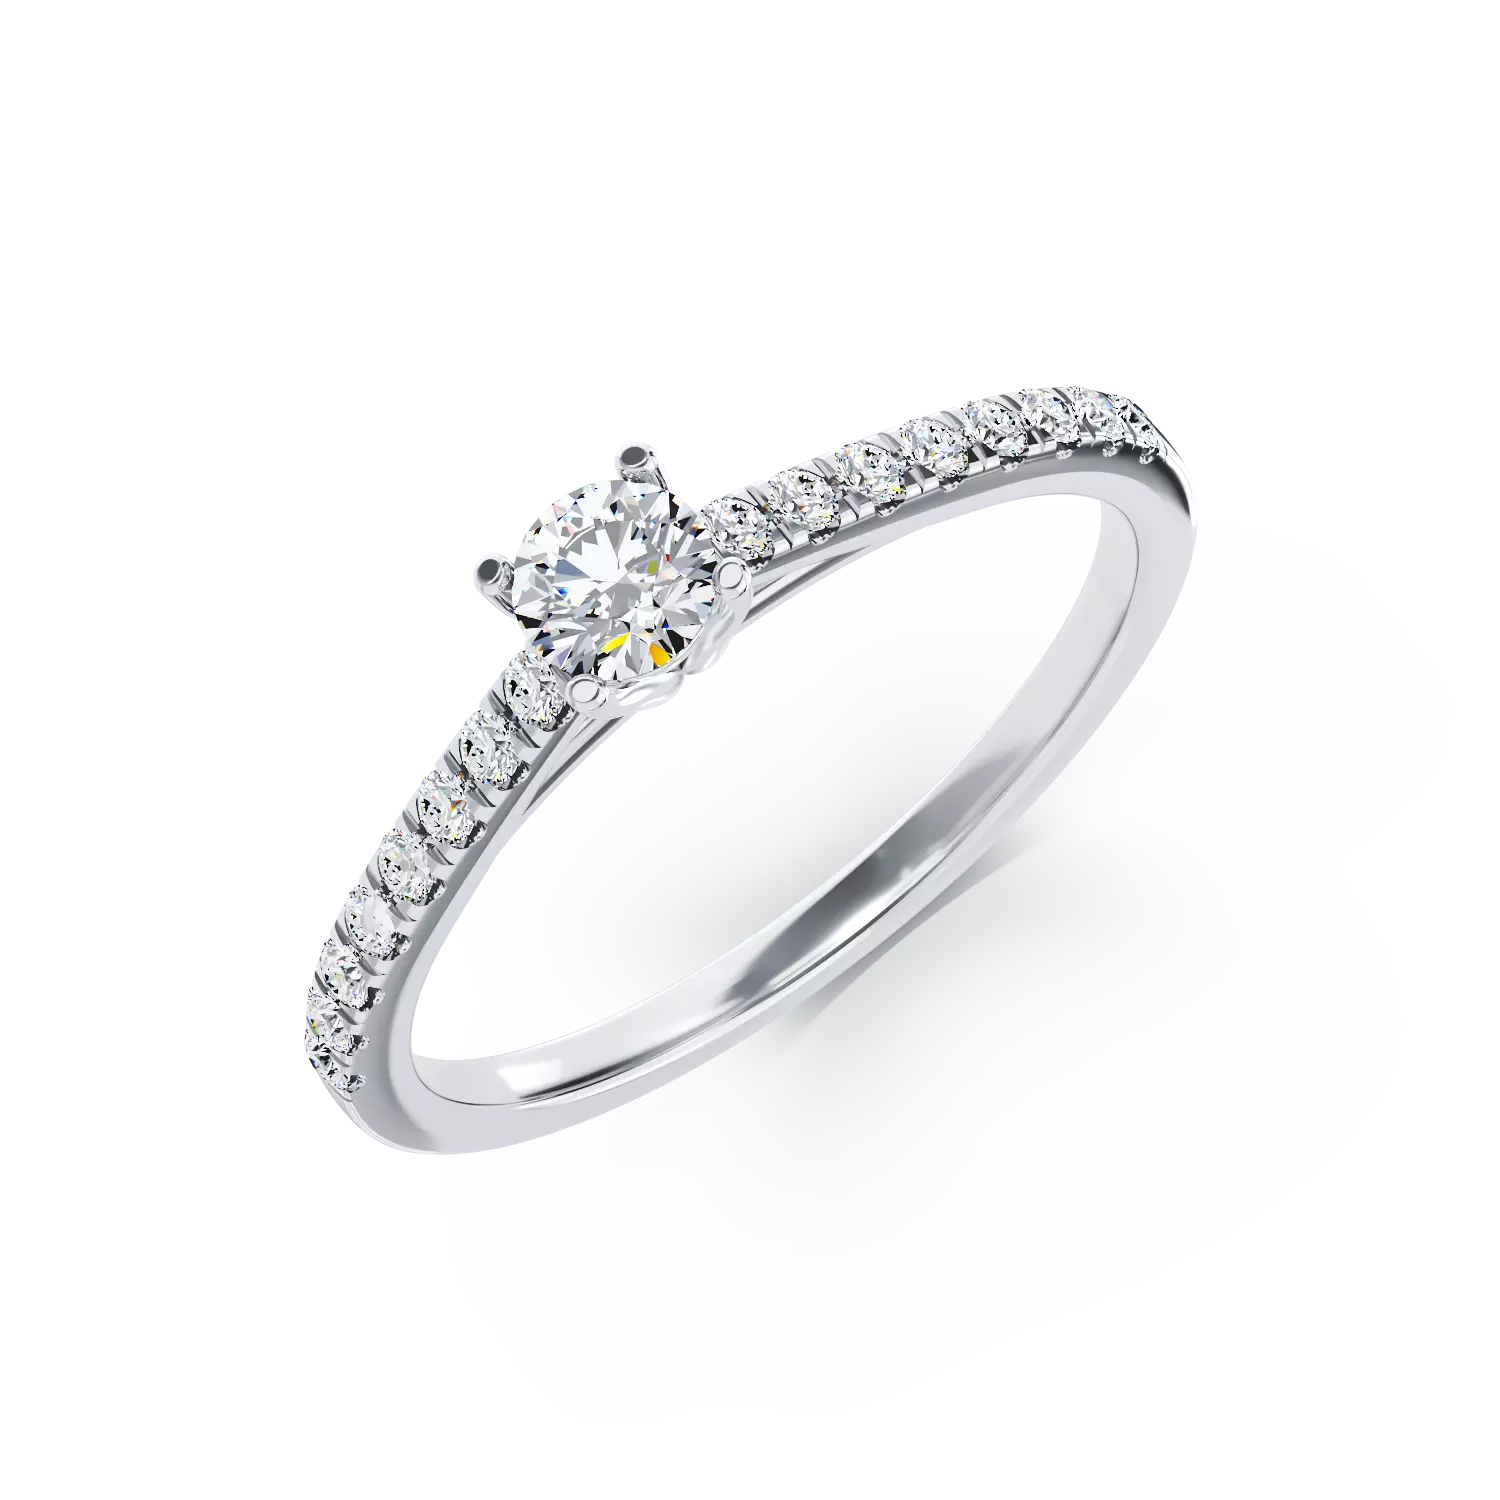 18K white gold engagement ring with 0.4ct diamond and 0.14ct diamonds